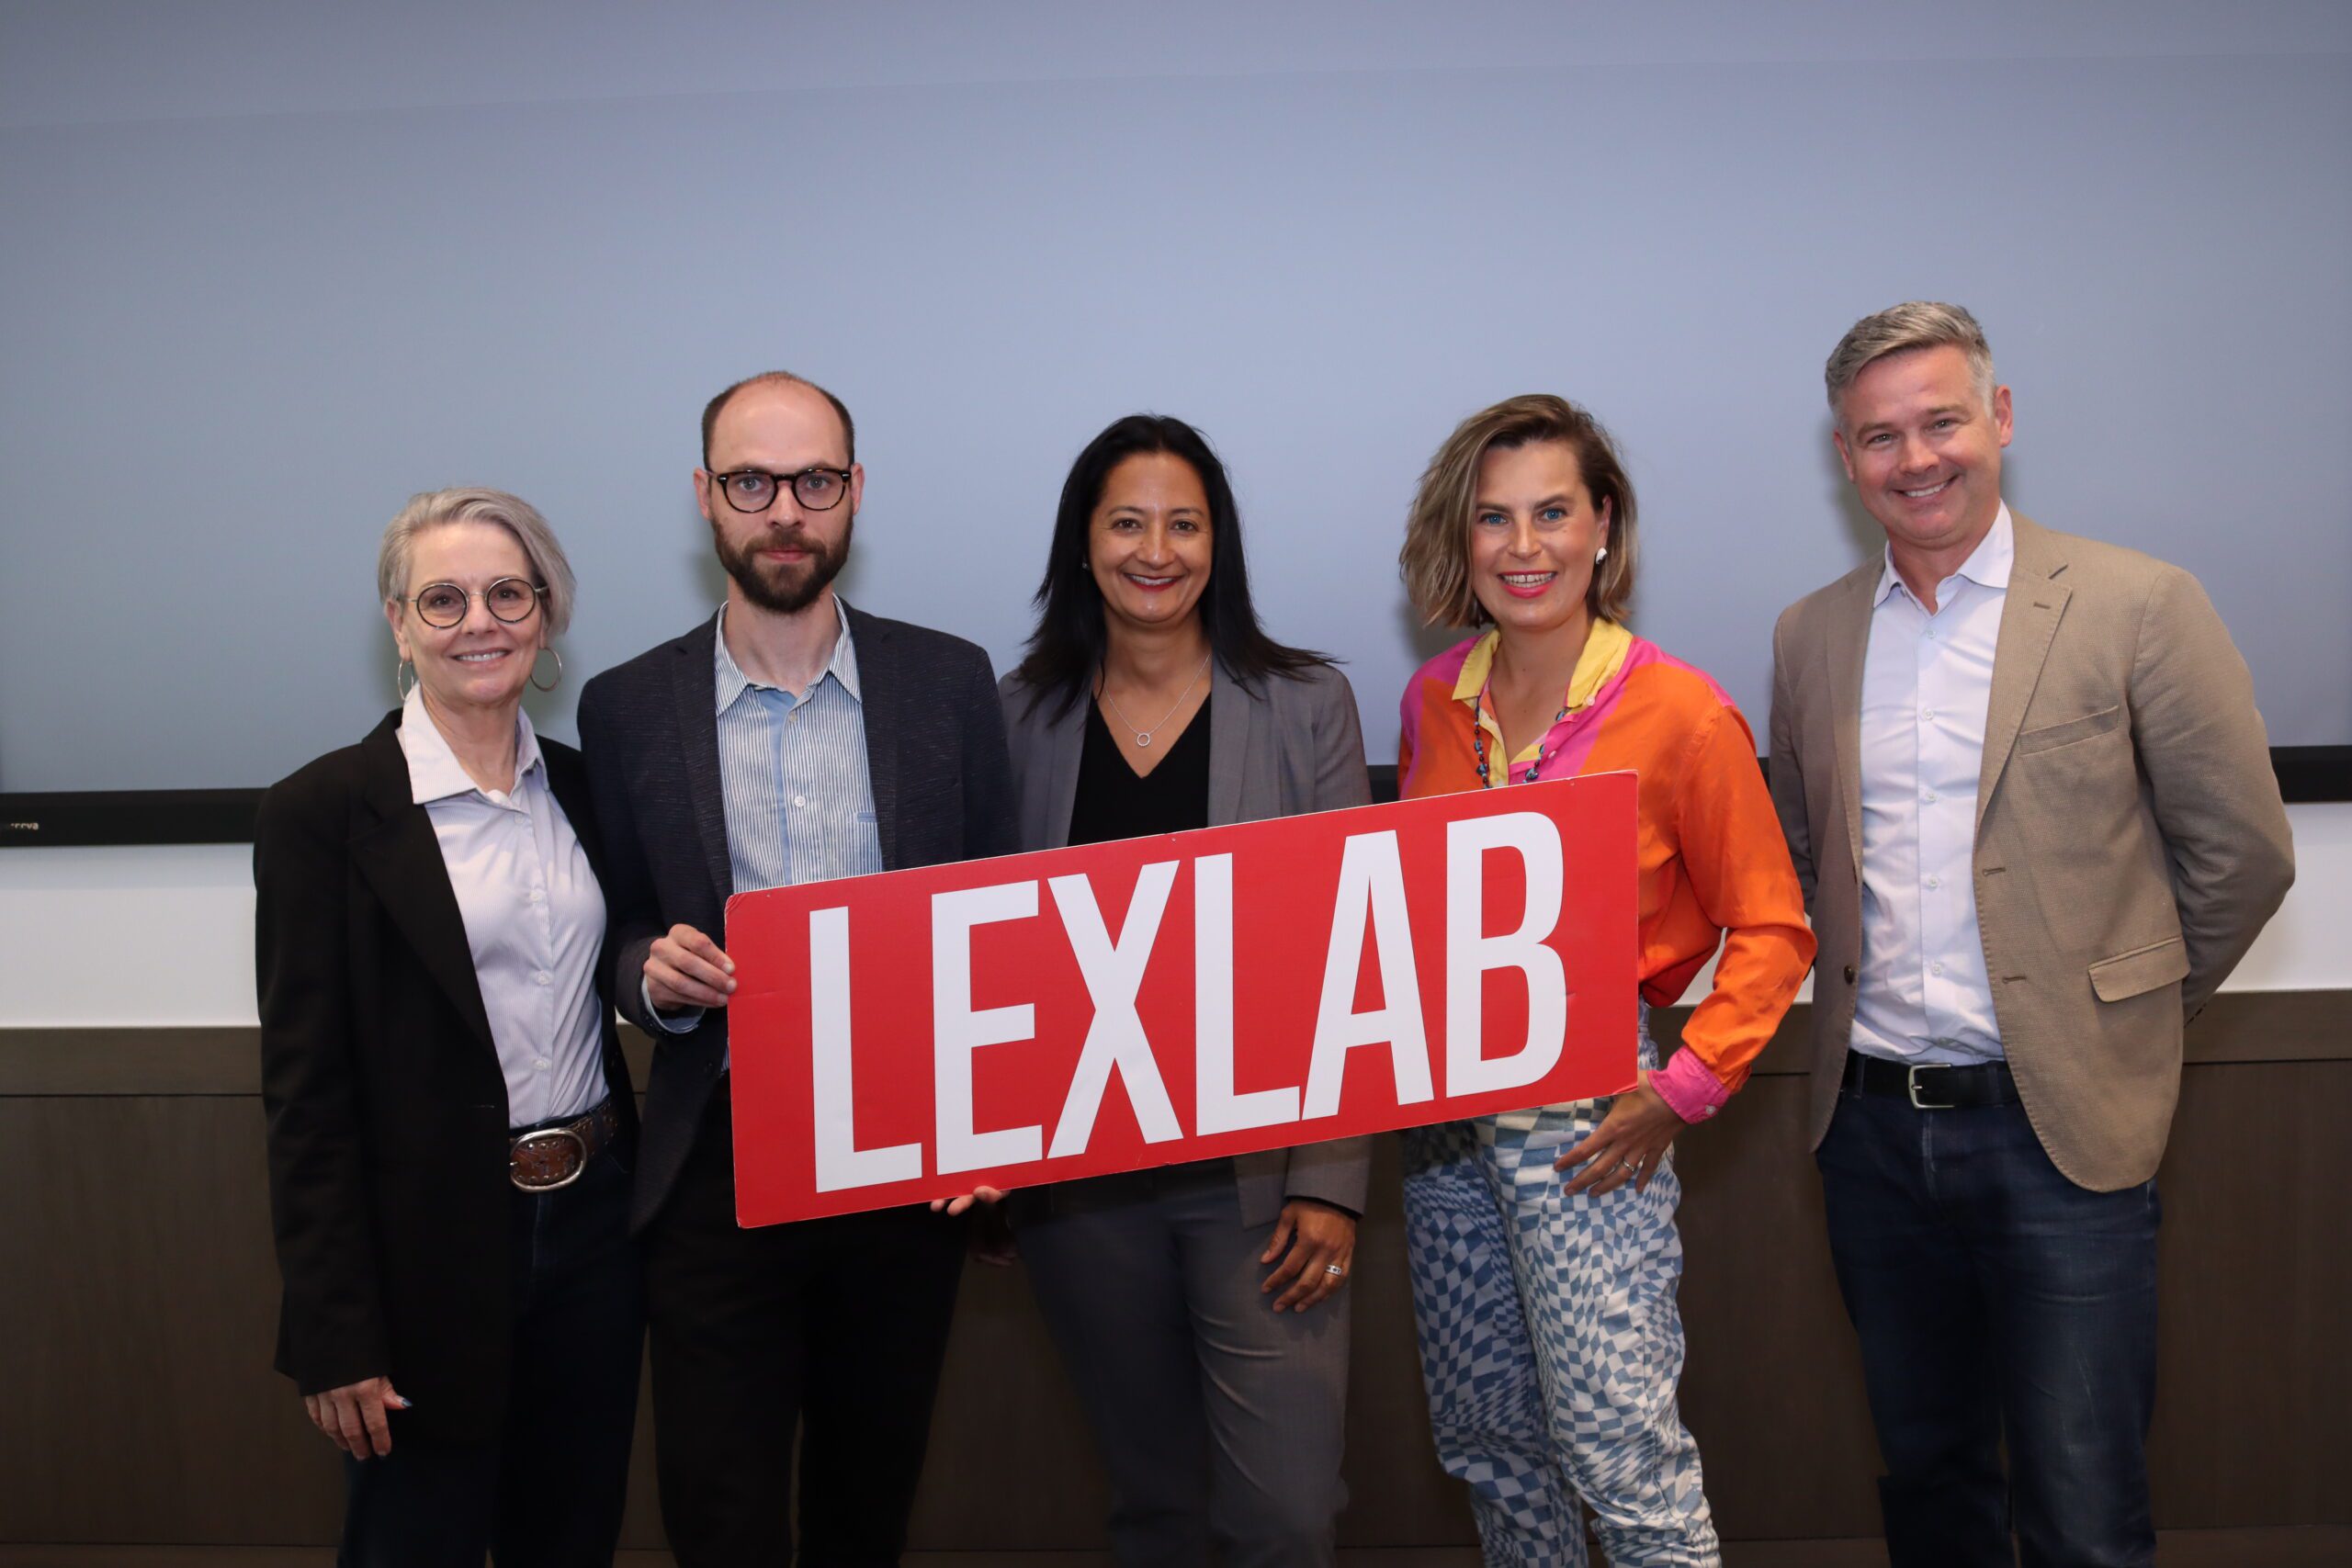 Professors and legal technology entrepreneuers pose with a UC Hastings LexLab sign